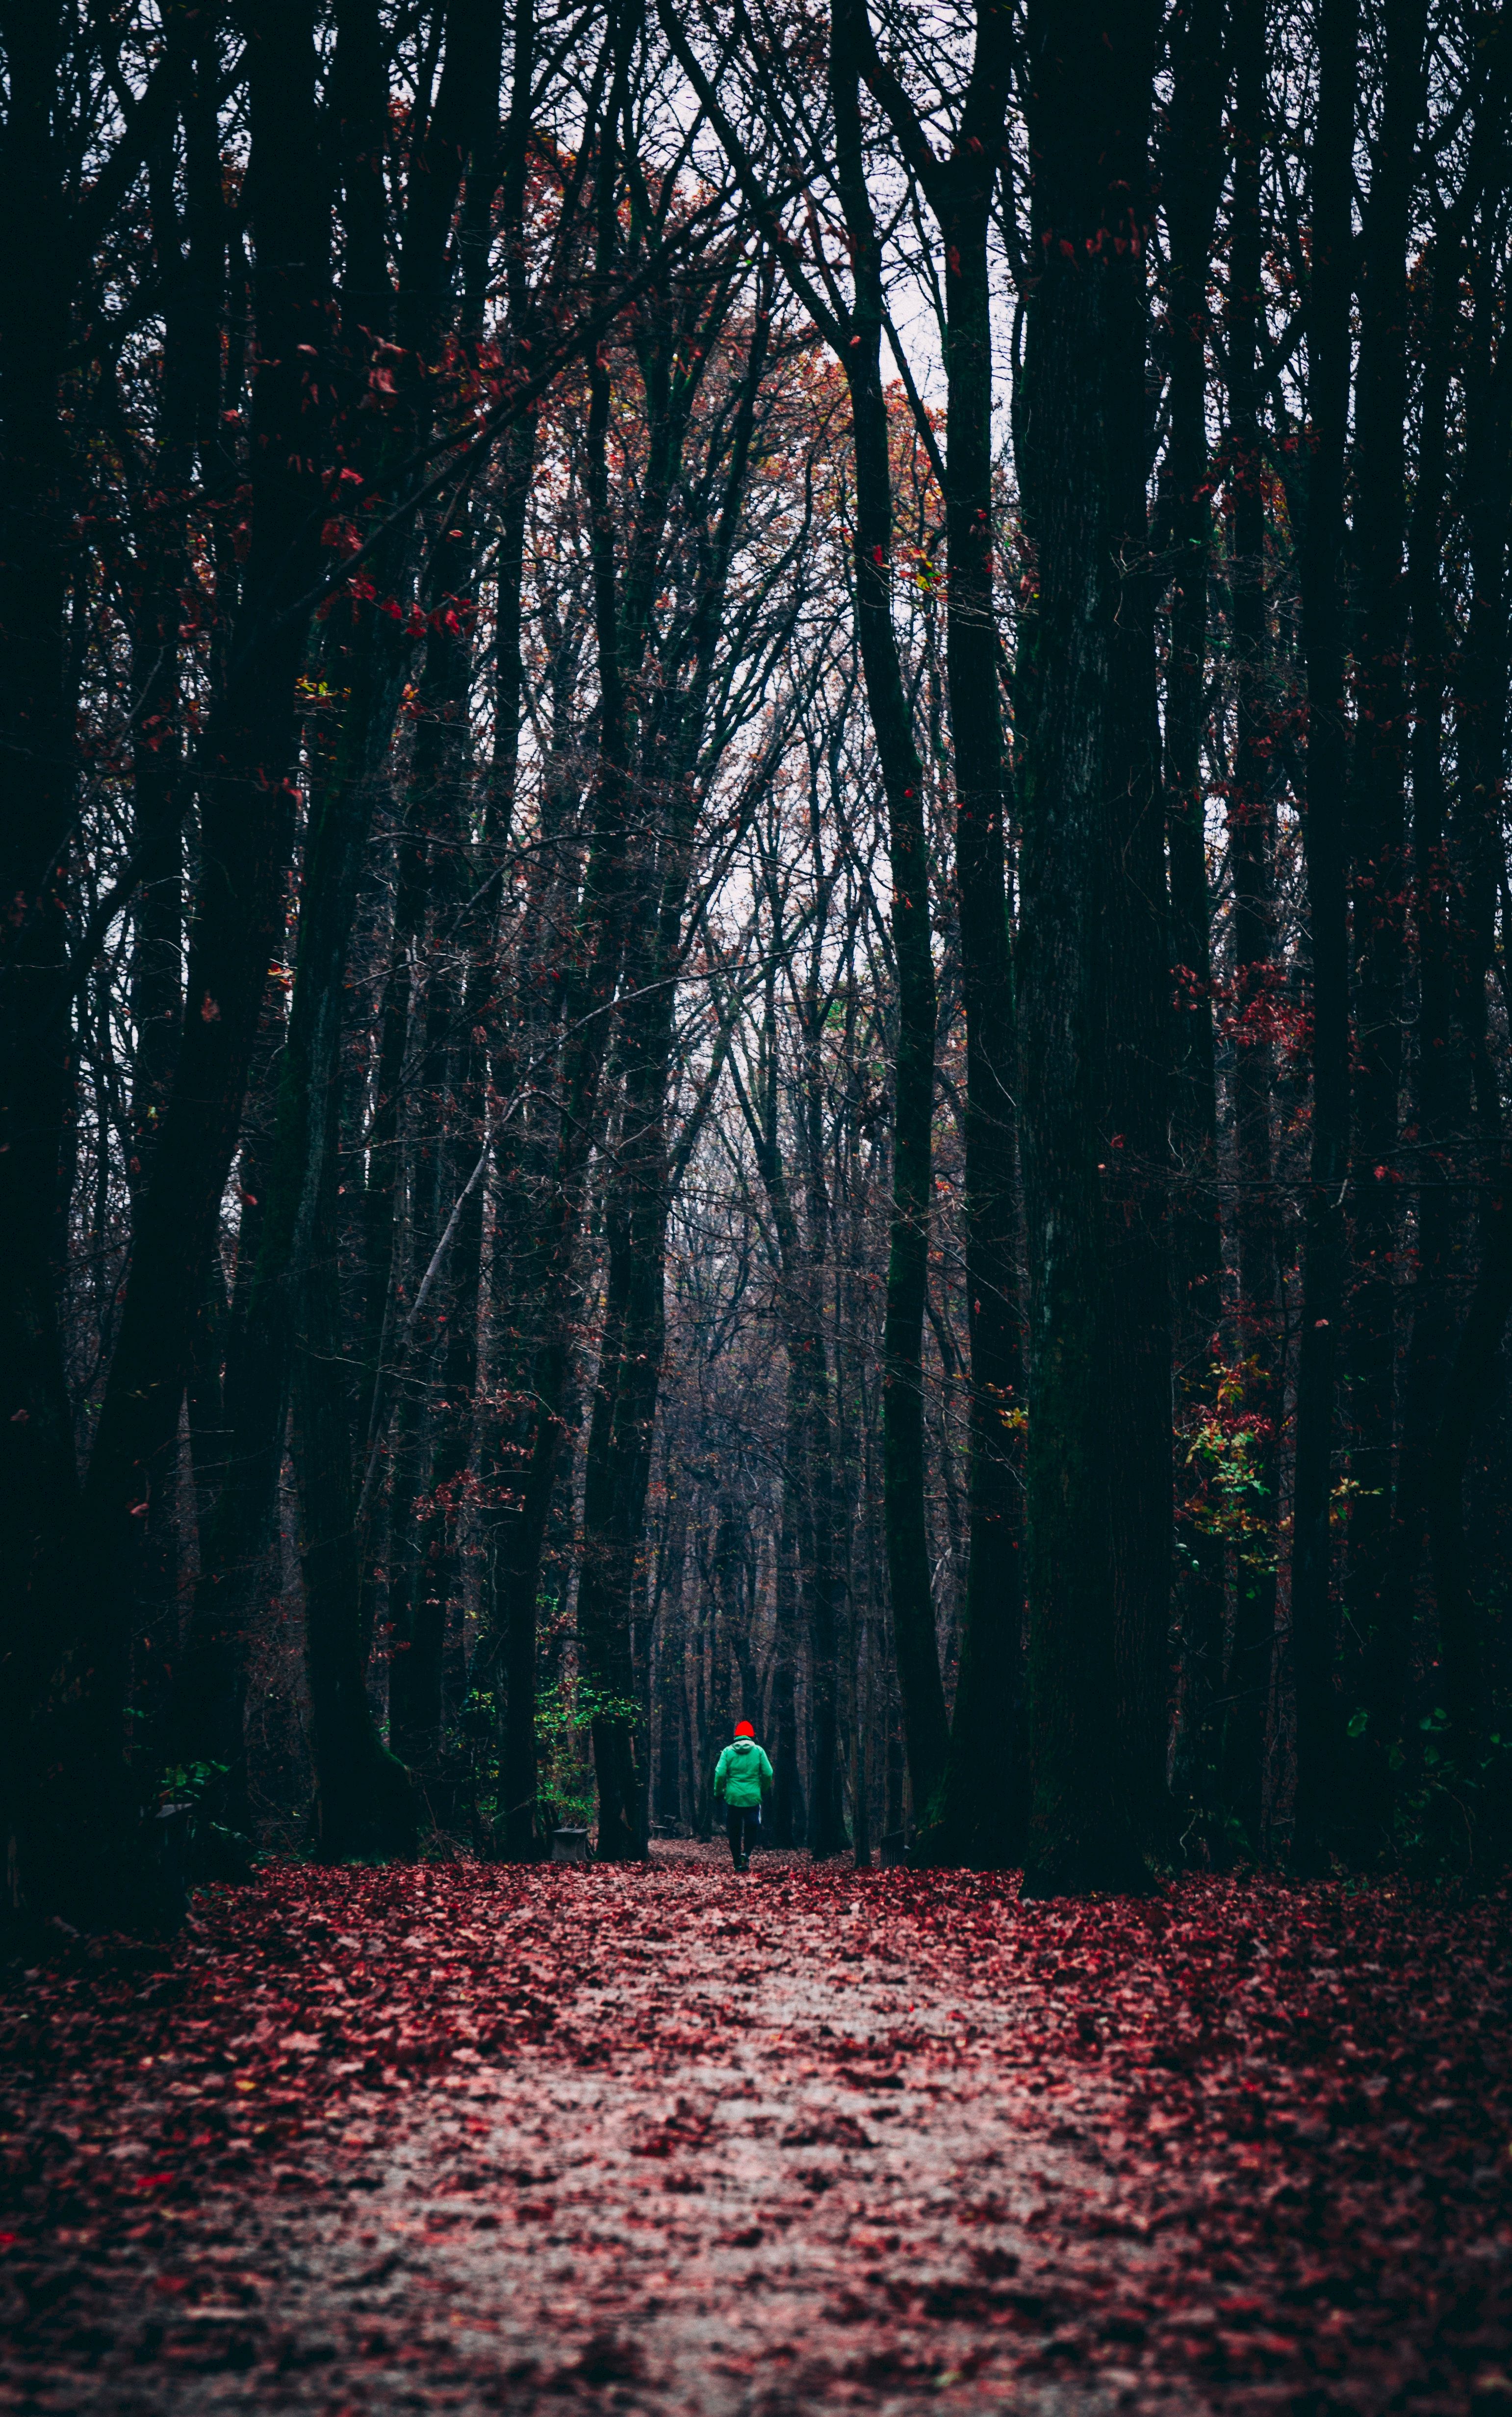 forest, nature, autumn, foliage, human, person, alone, lonely, run, running Desktop home screen Wallpaper